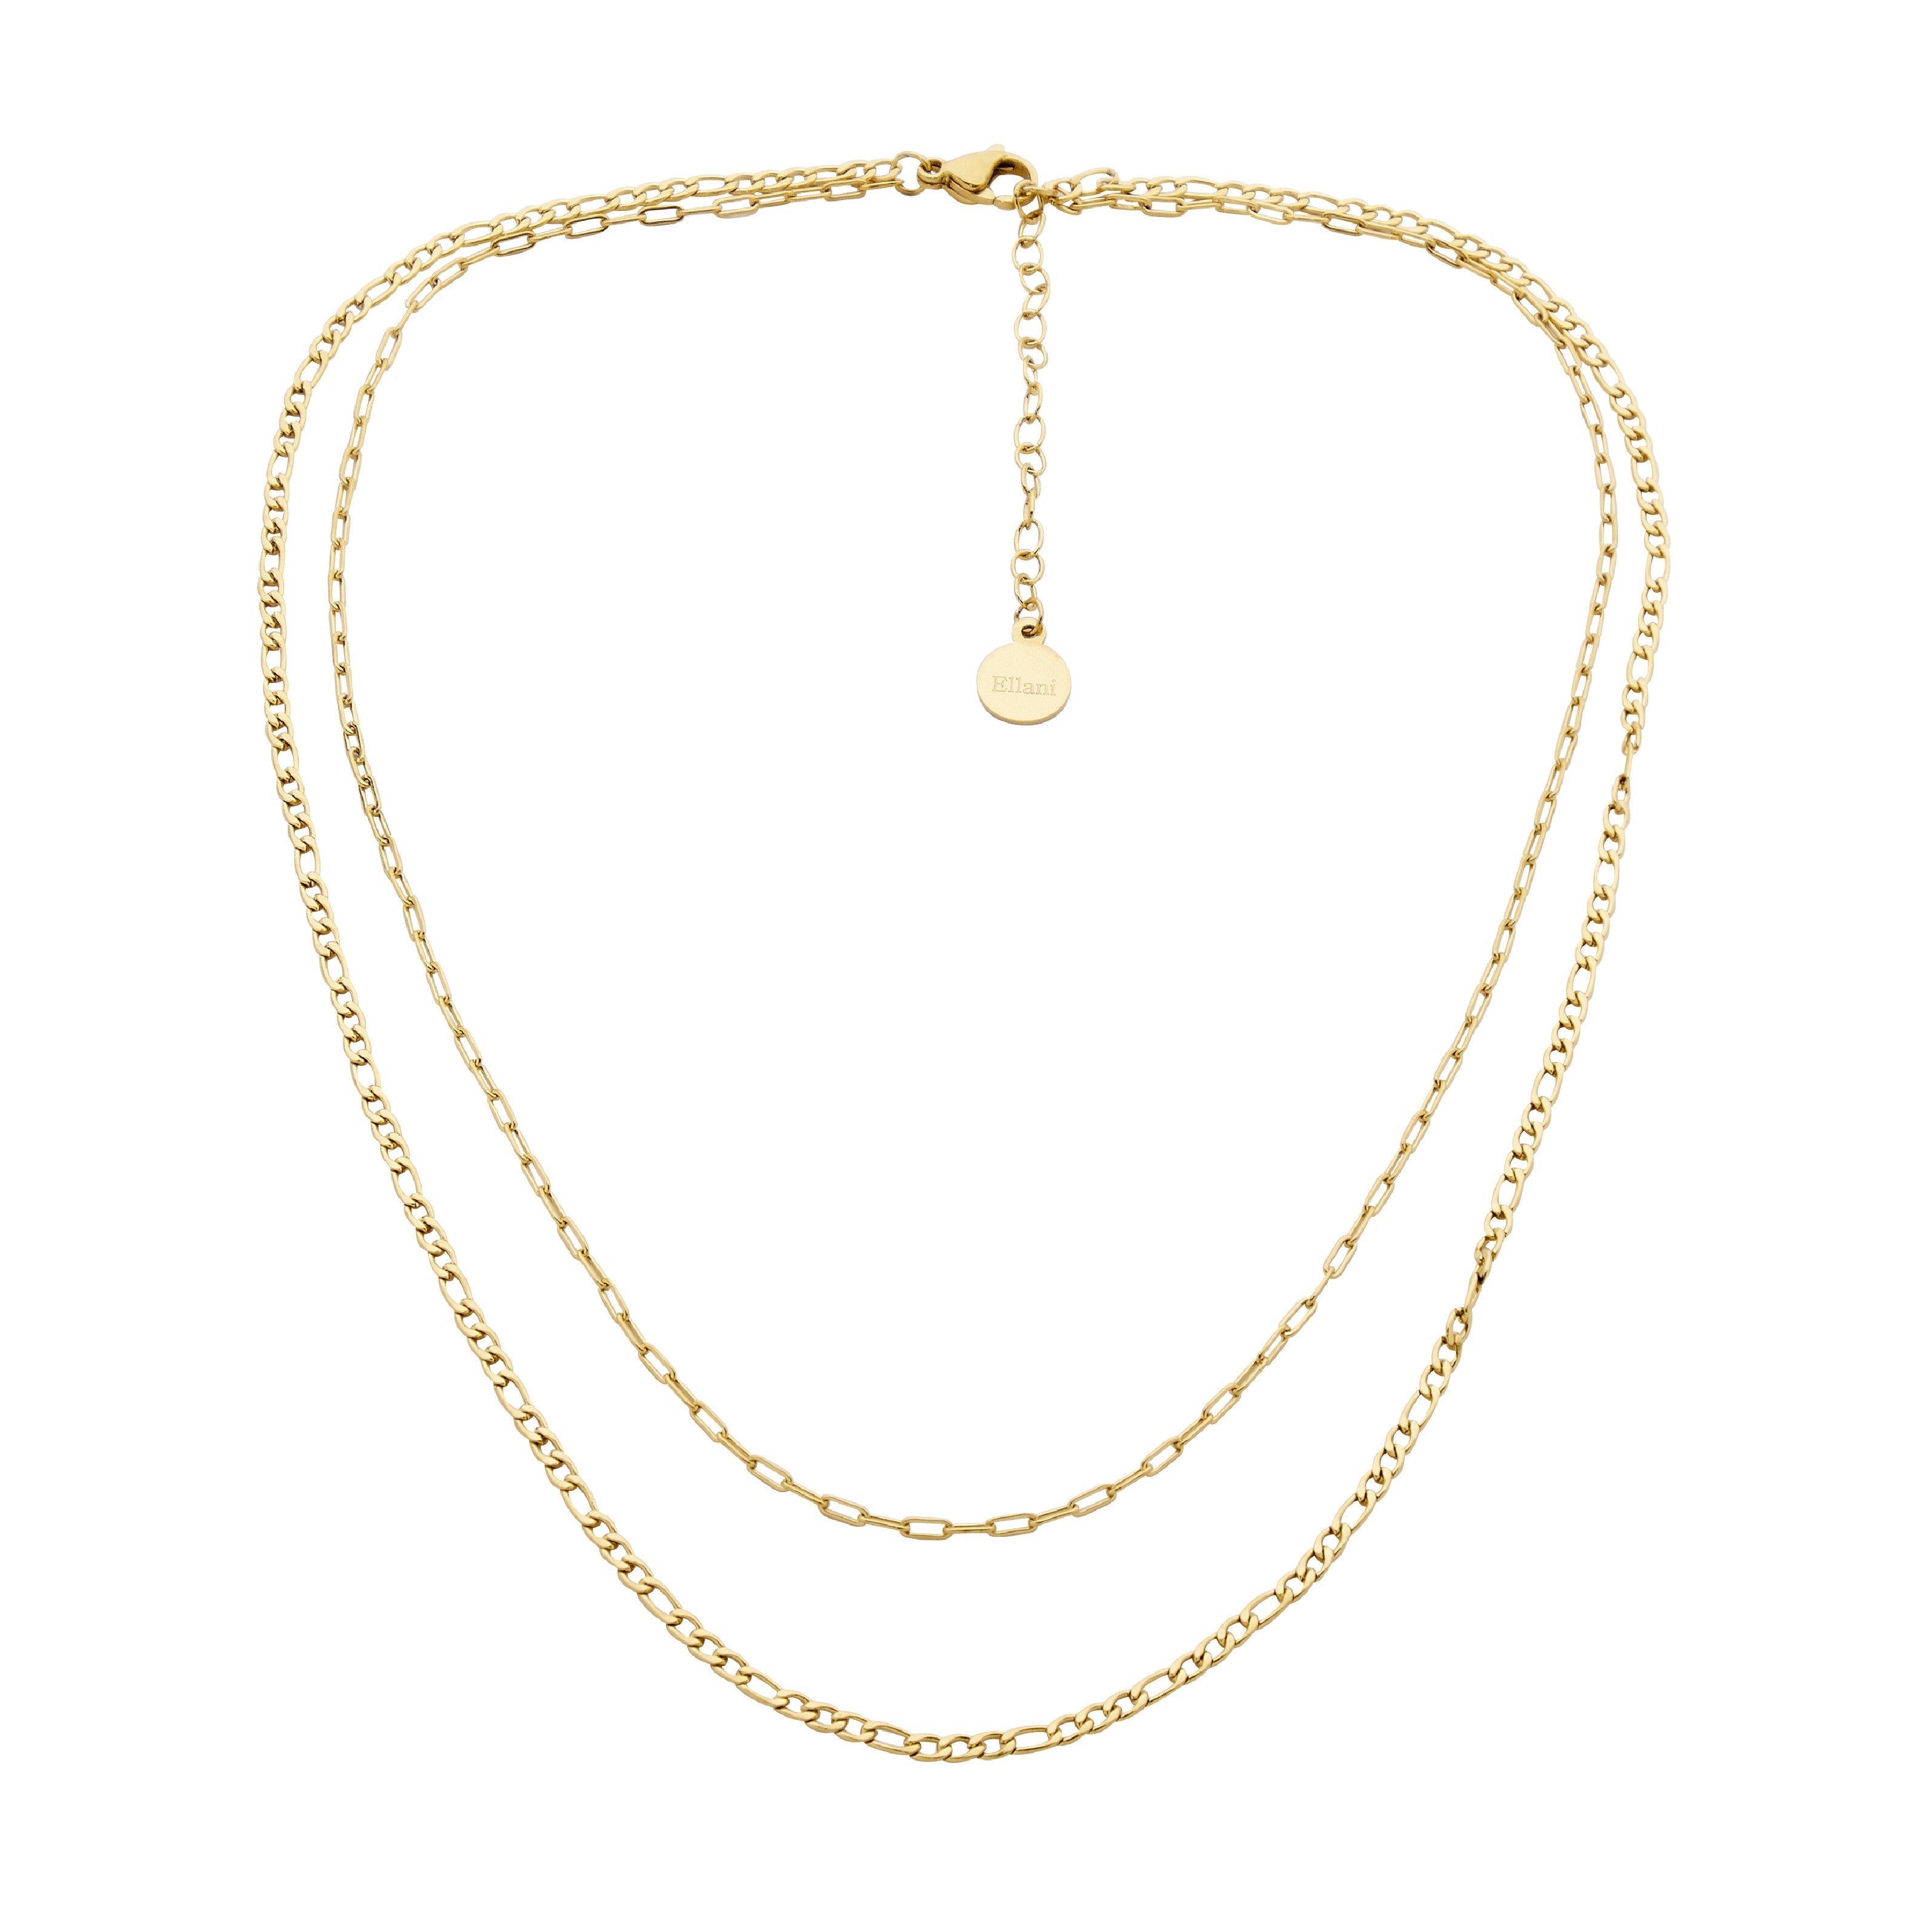 Stainless Steel Double Chain Necklace 40 & 45cm+ Ext. With Gold IP Plating 